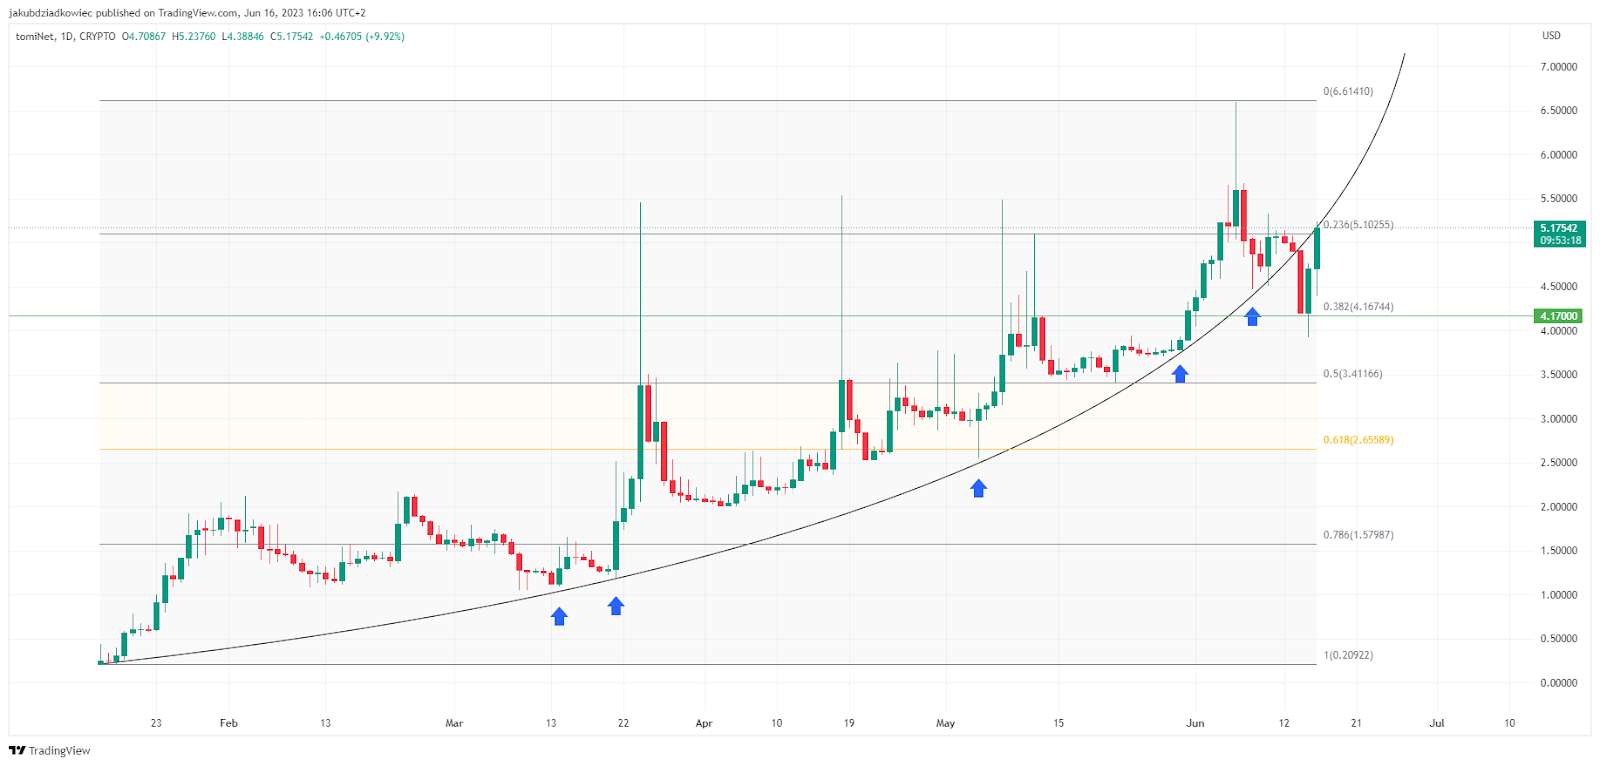 TOMI/USDT chart by Tradingview,
altcoin gainers, biggest altcoin gainers, altcoin gainers, top altcoins this week, 